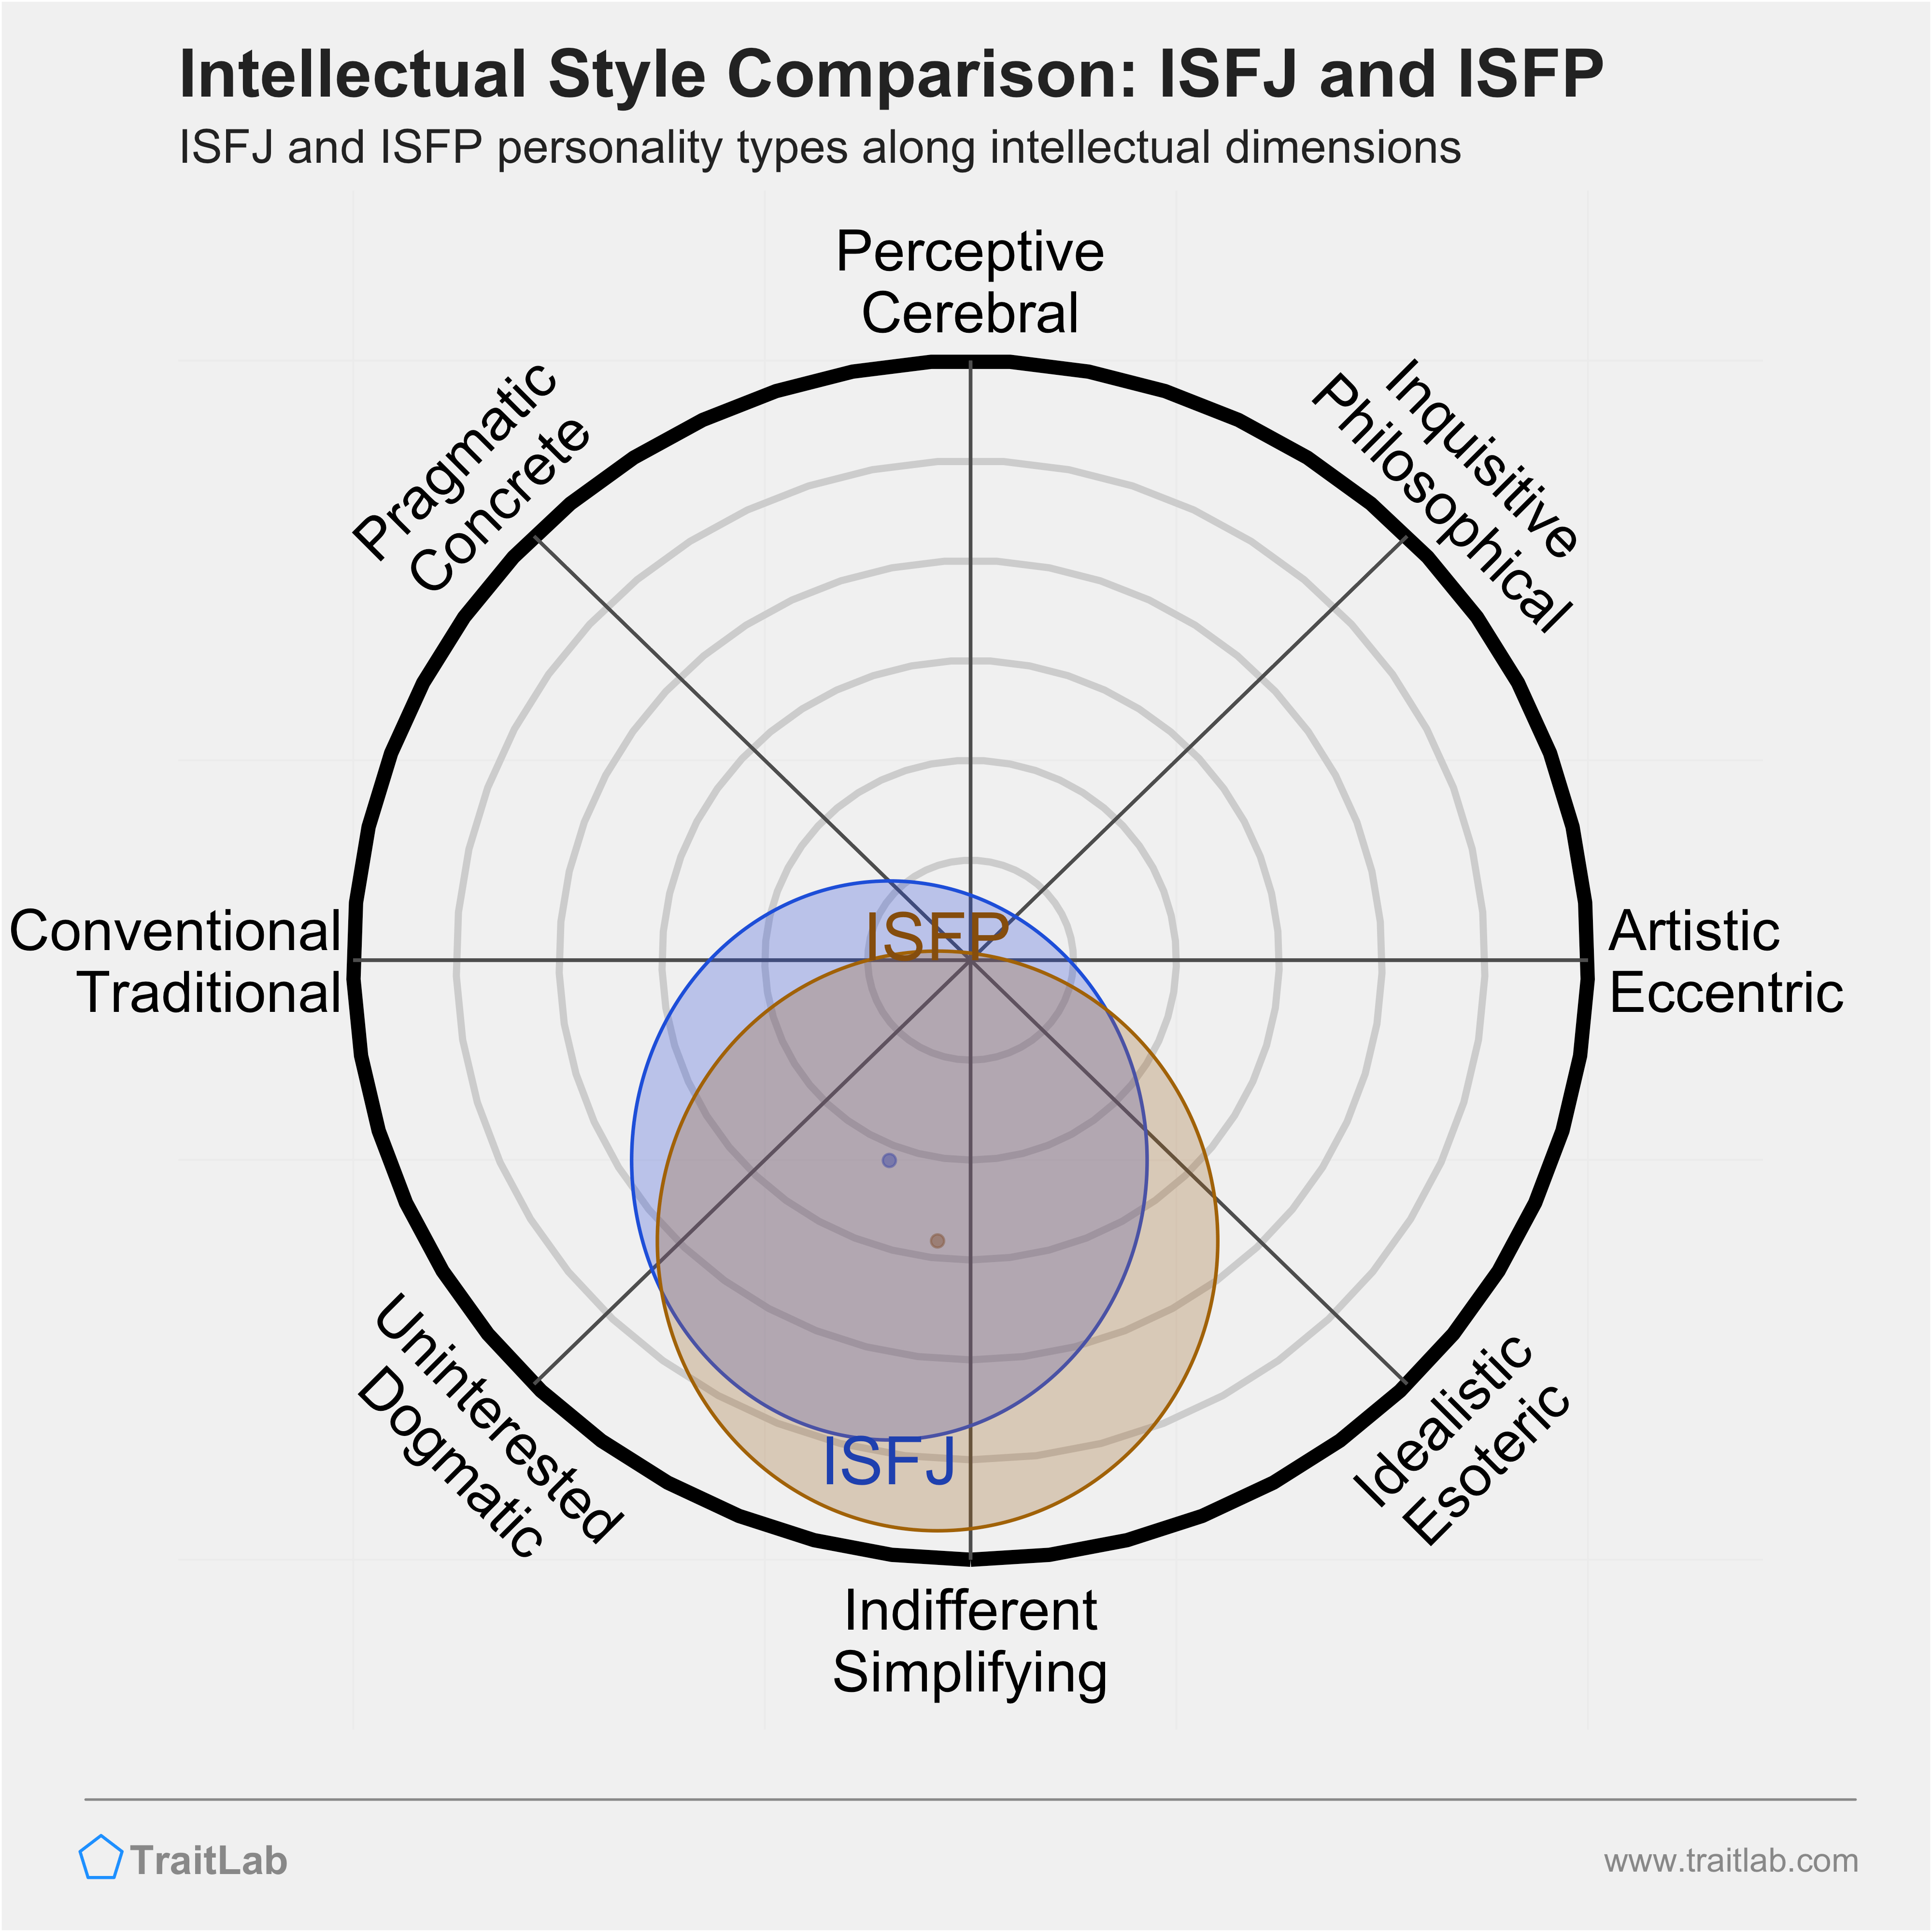 ISFJ and ISFP comparison across intellectual dimensions